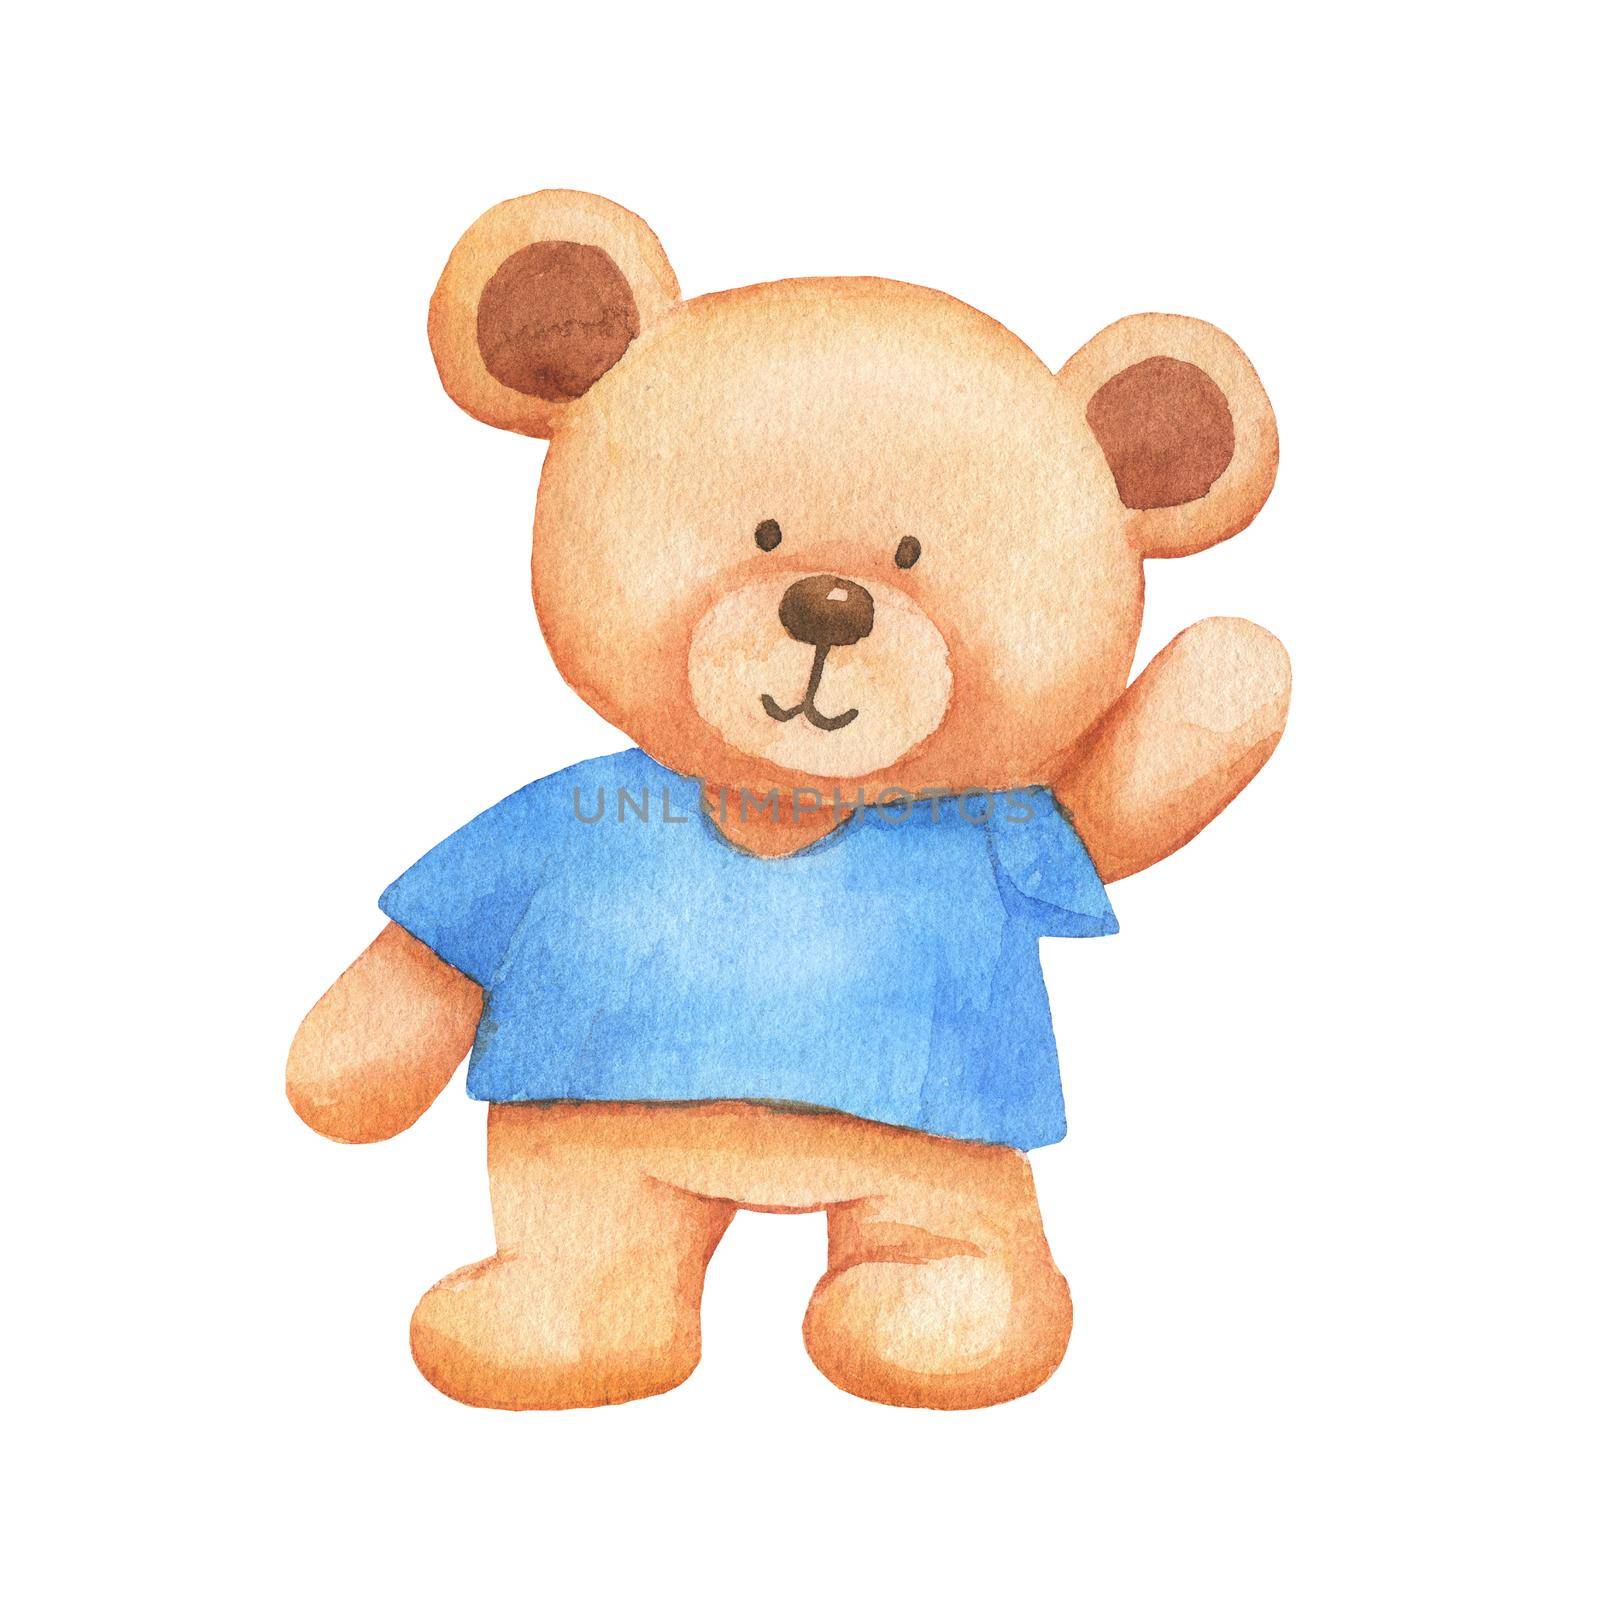 Watercolor cute bear toy in blue T-shirt. Hand drawn illustration isolated on white